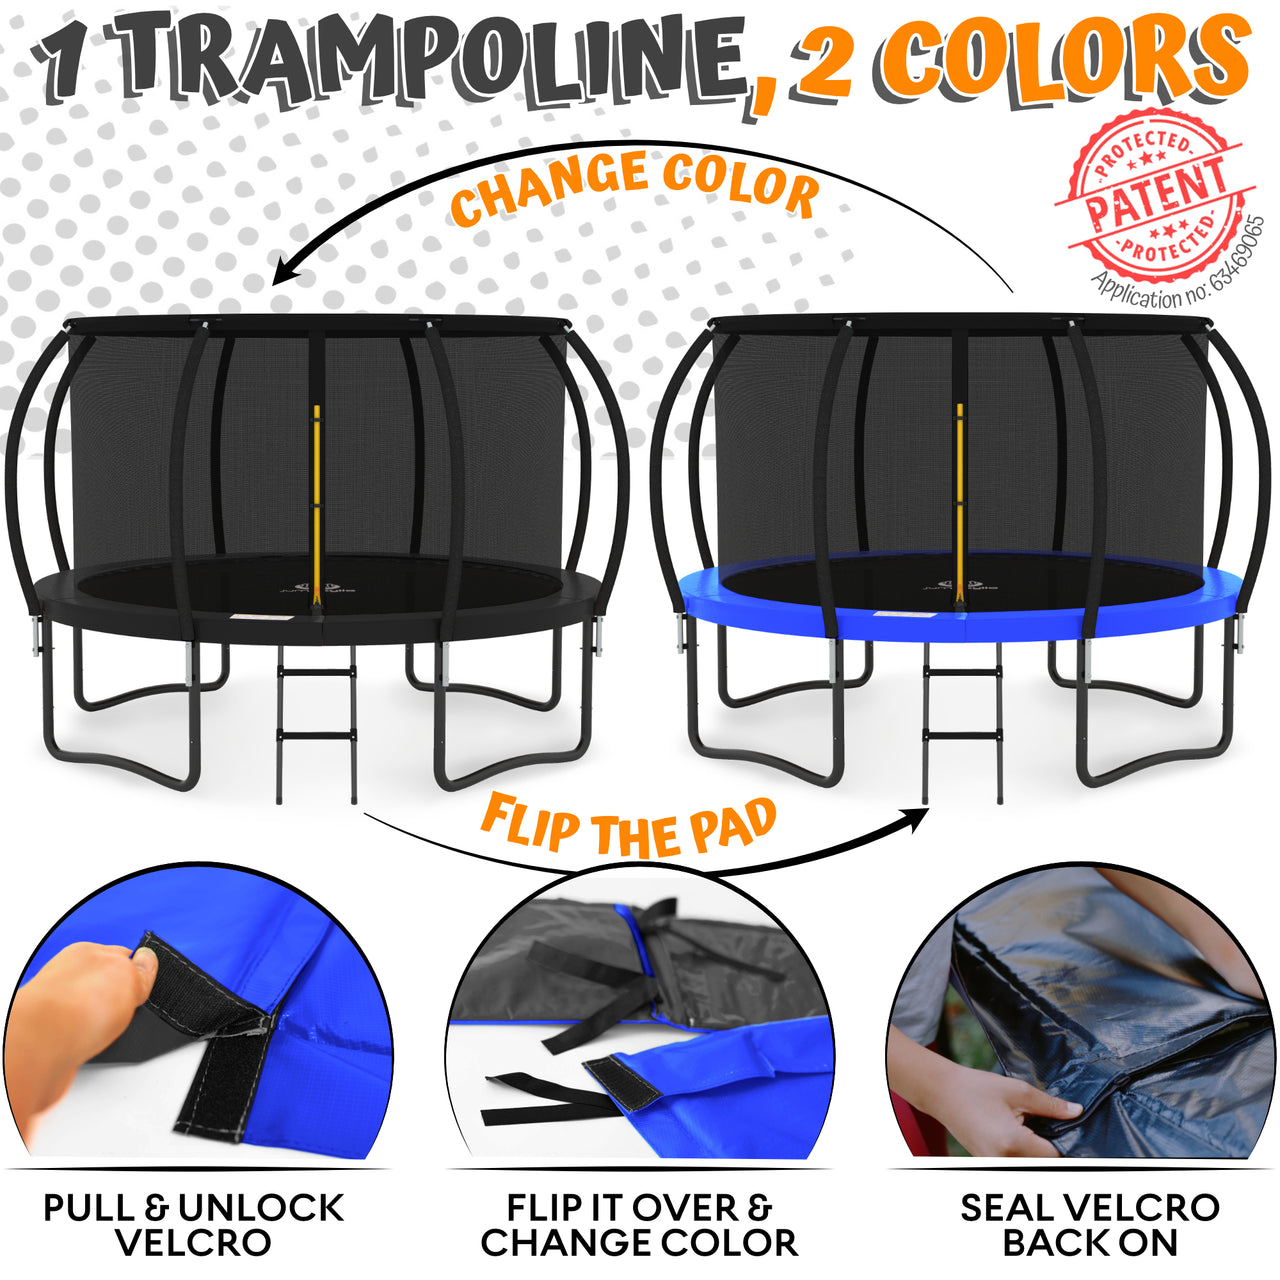 Jumpzylla 16FT Trampoline with Enclosure & Double Color Pad Cover